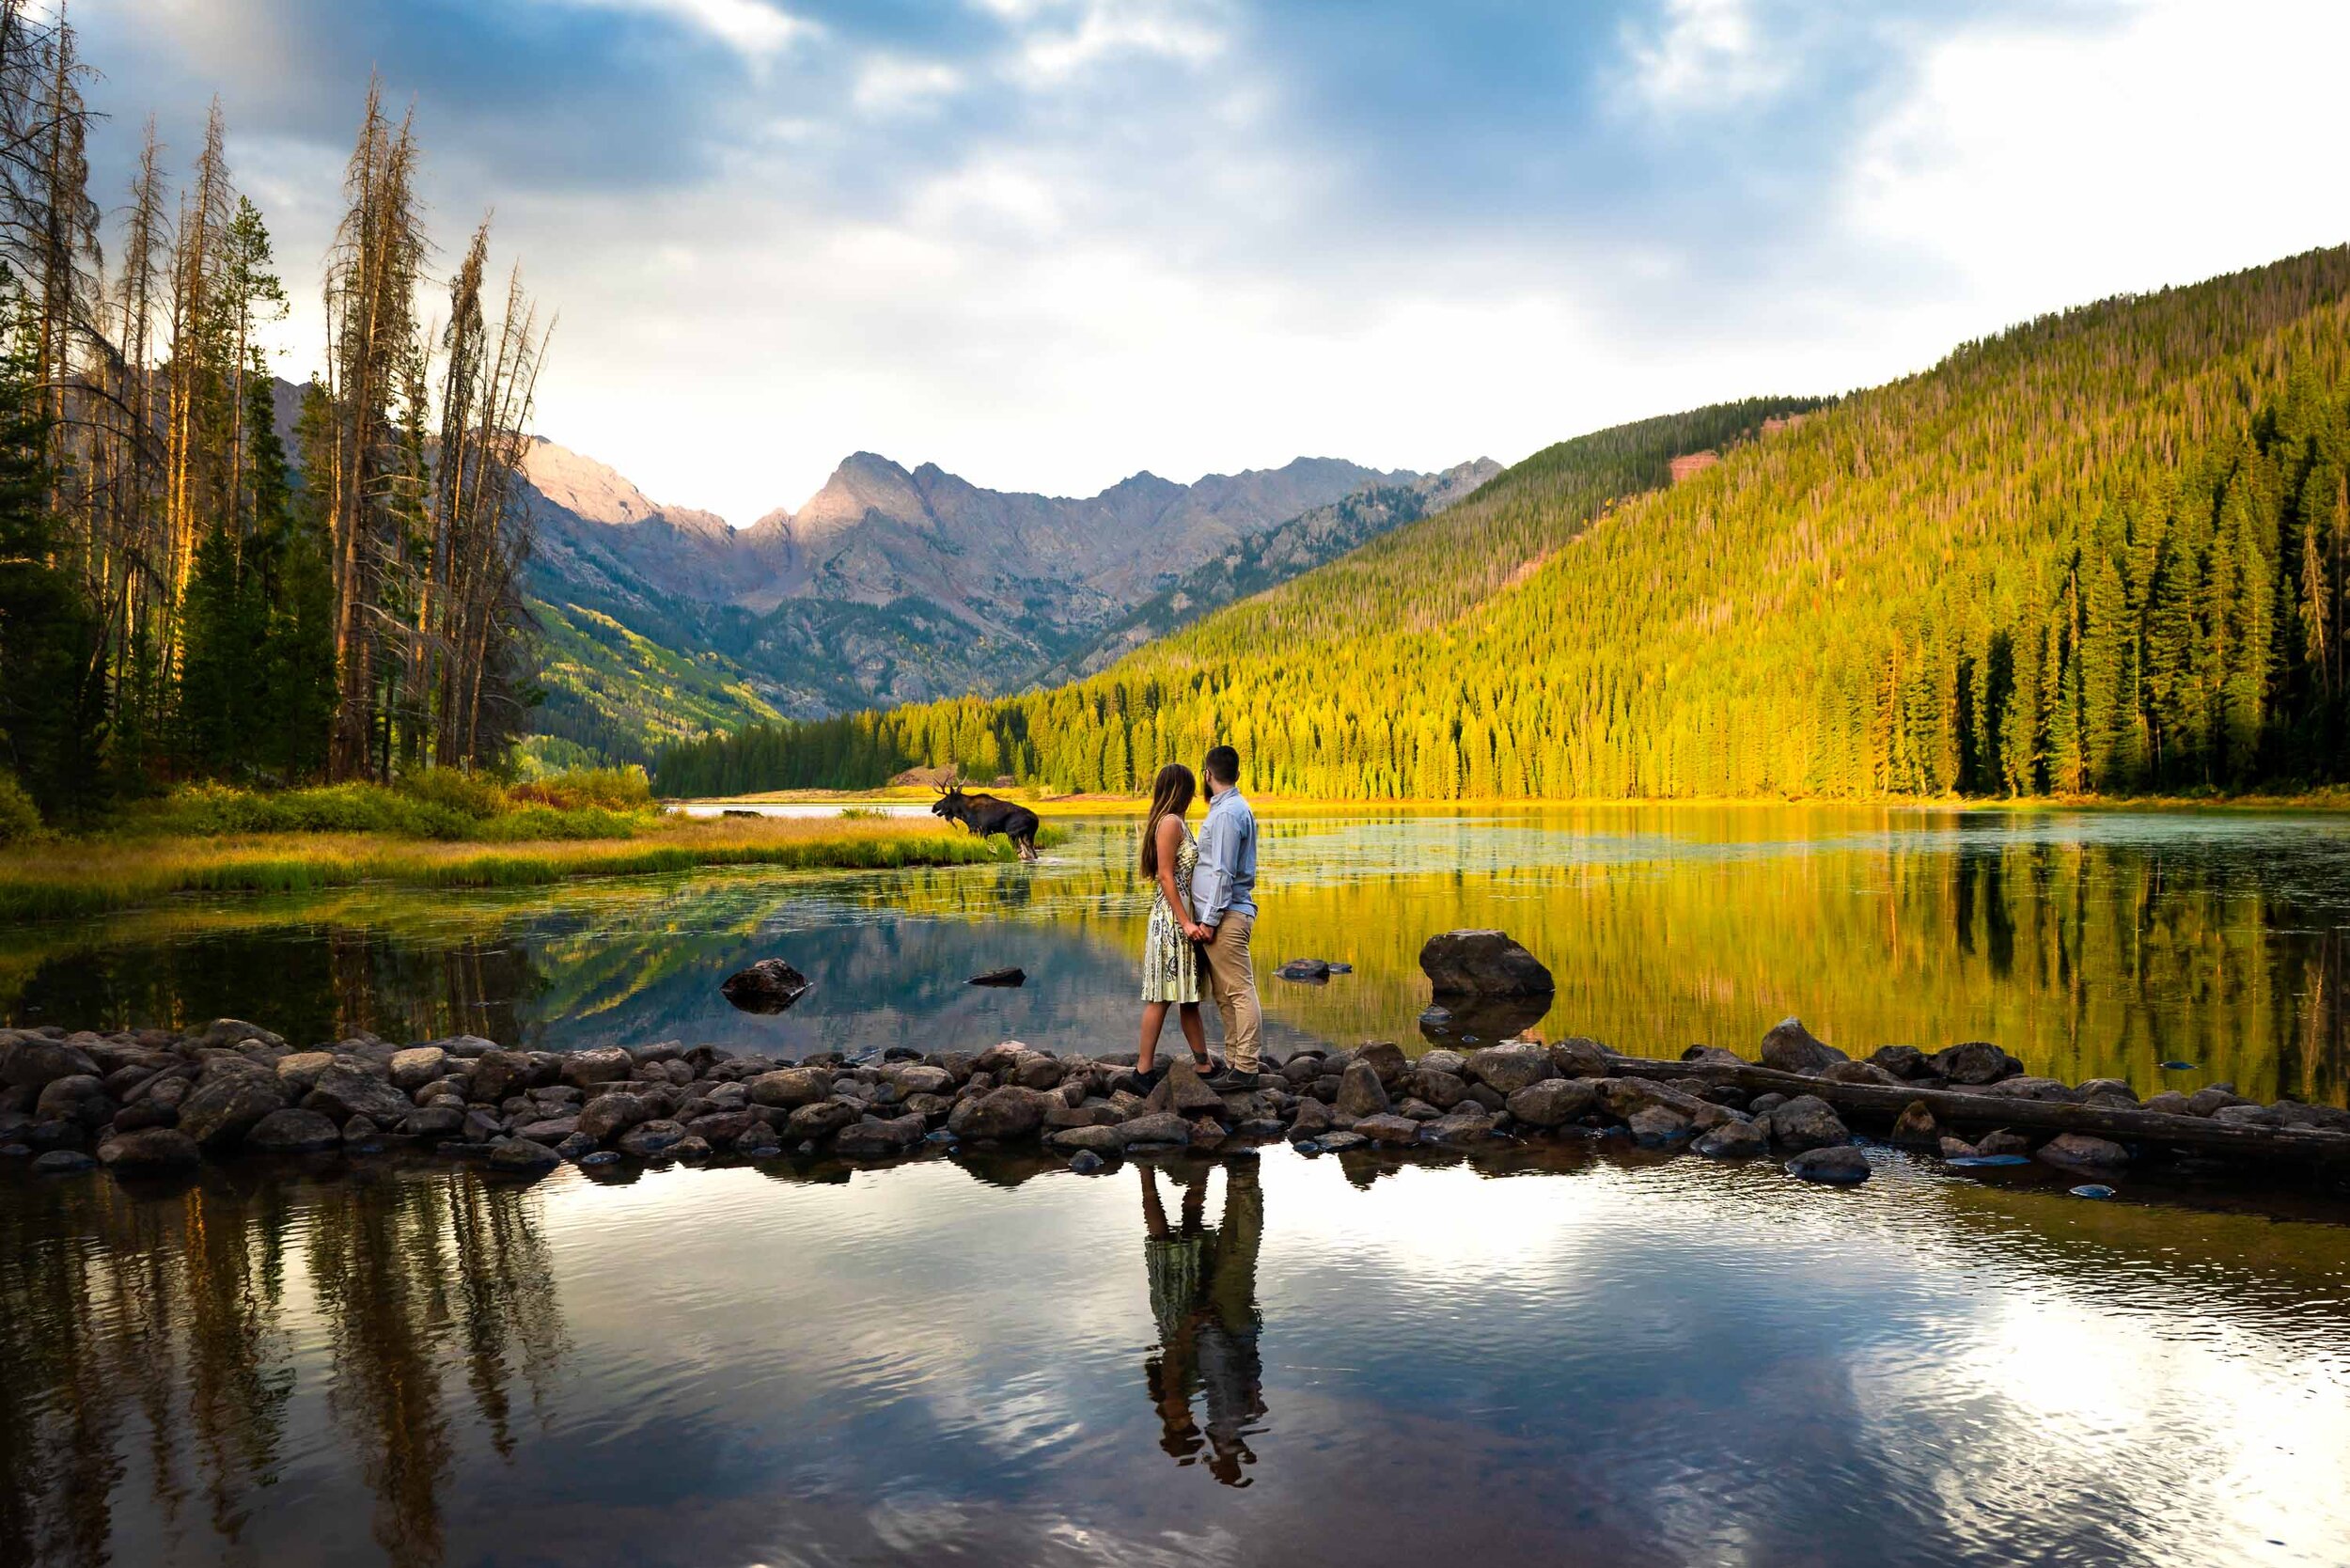 Engaged couple embraces as they watch a moose walk by during a portrait session by the lake during golden hour in the peak of the fall season with foliage all around, Engagement Session, Engagement Photos, Engagement Photos Inspiration, Engagement Photography, Engagement Photographer, Fall Engagement Photos, Mountain Engagement Photos, Piney River Ranch engagement photos, Vail engagement session, Vail engagement photos, Vail engagement photography, Vail engagement photographer, Vail engagement inspiration, Colorado engagement session, Colorado engagement photos, Colorado engagement photography, Colorado engagement photographer, Colorado engagement inspiration